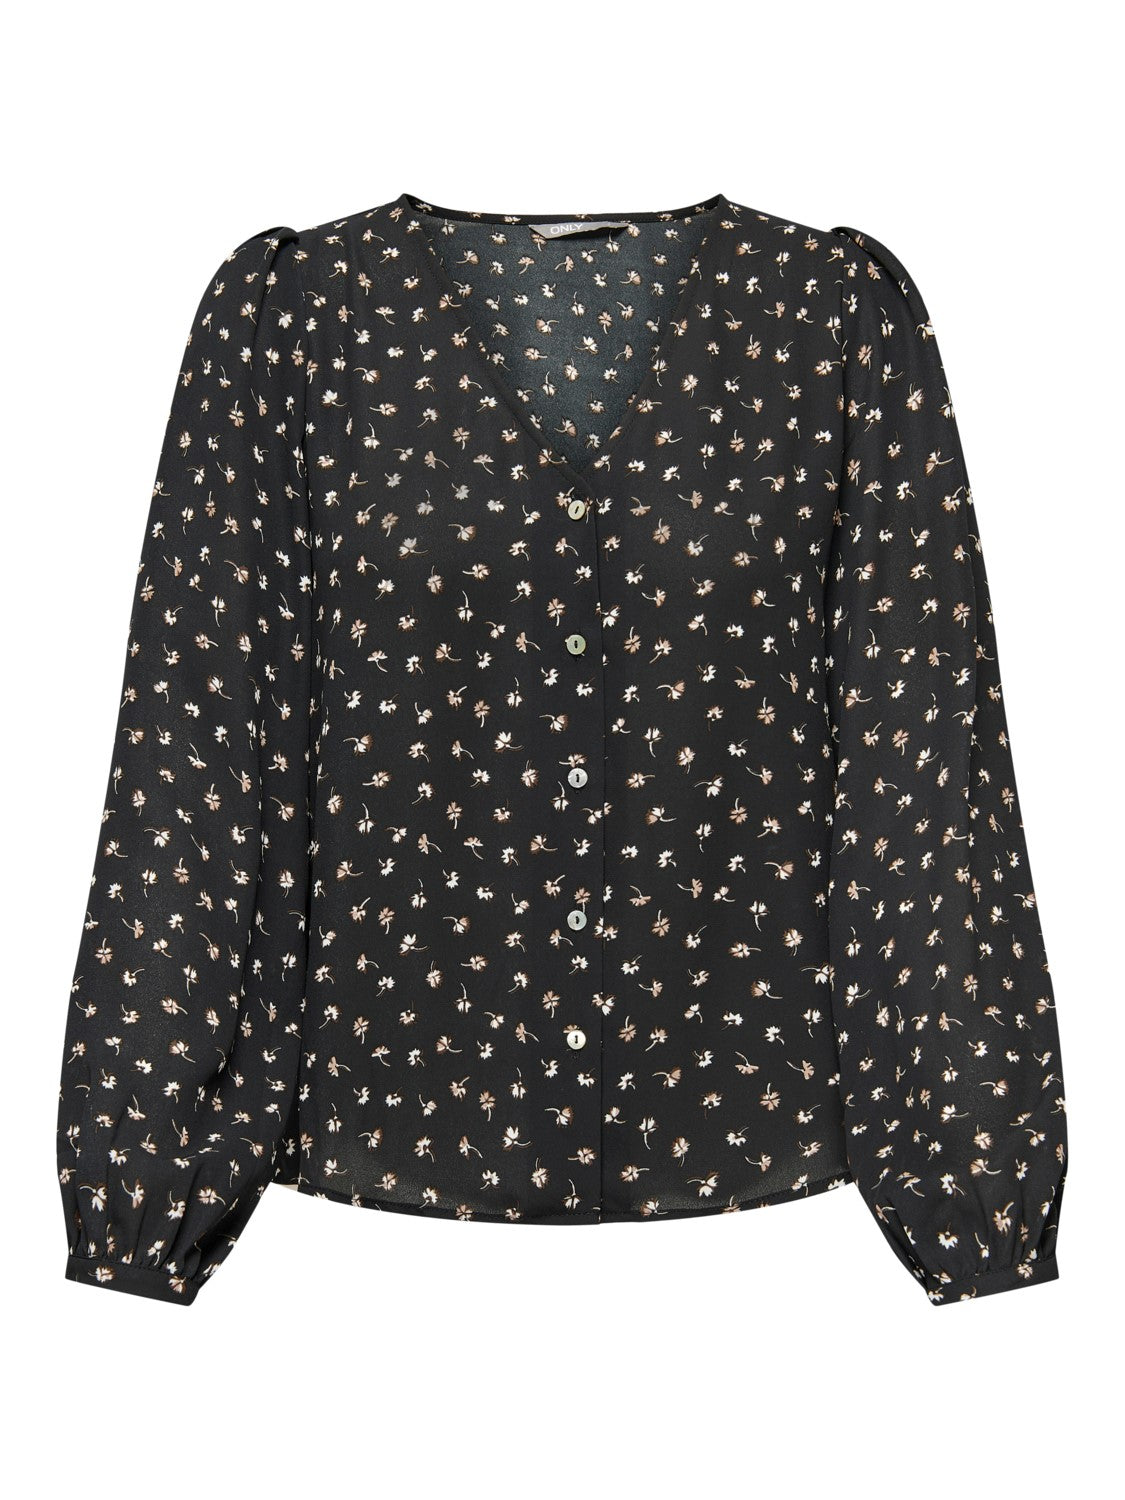 ONLY Women's Patterned Black Blouse